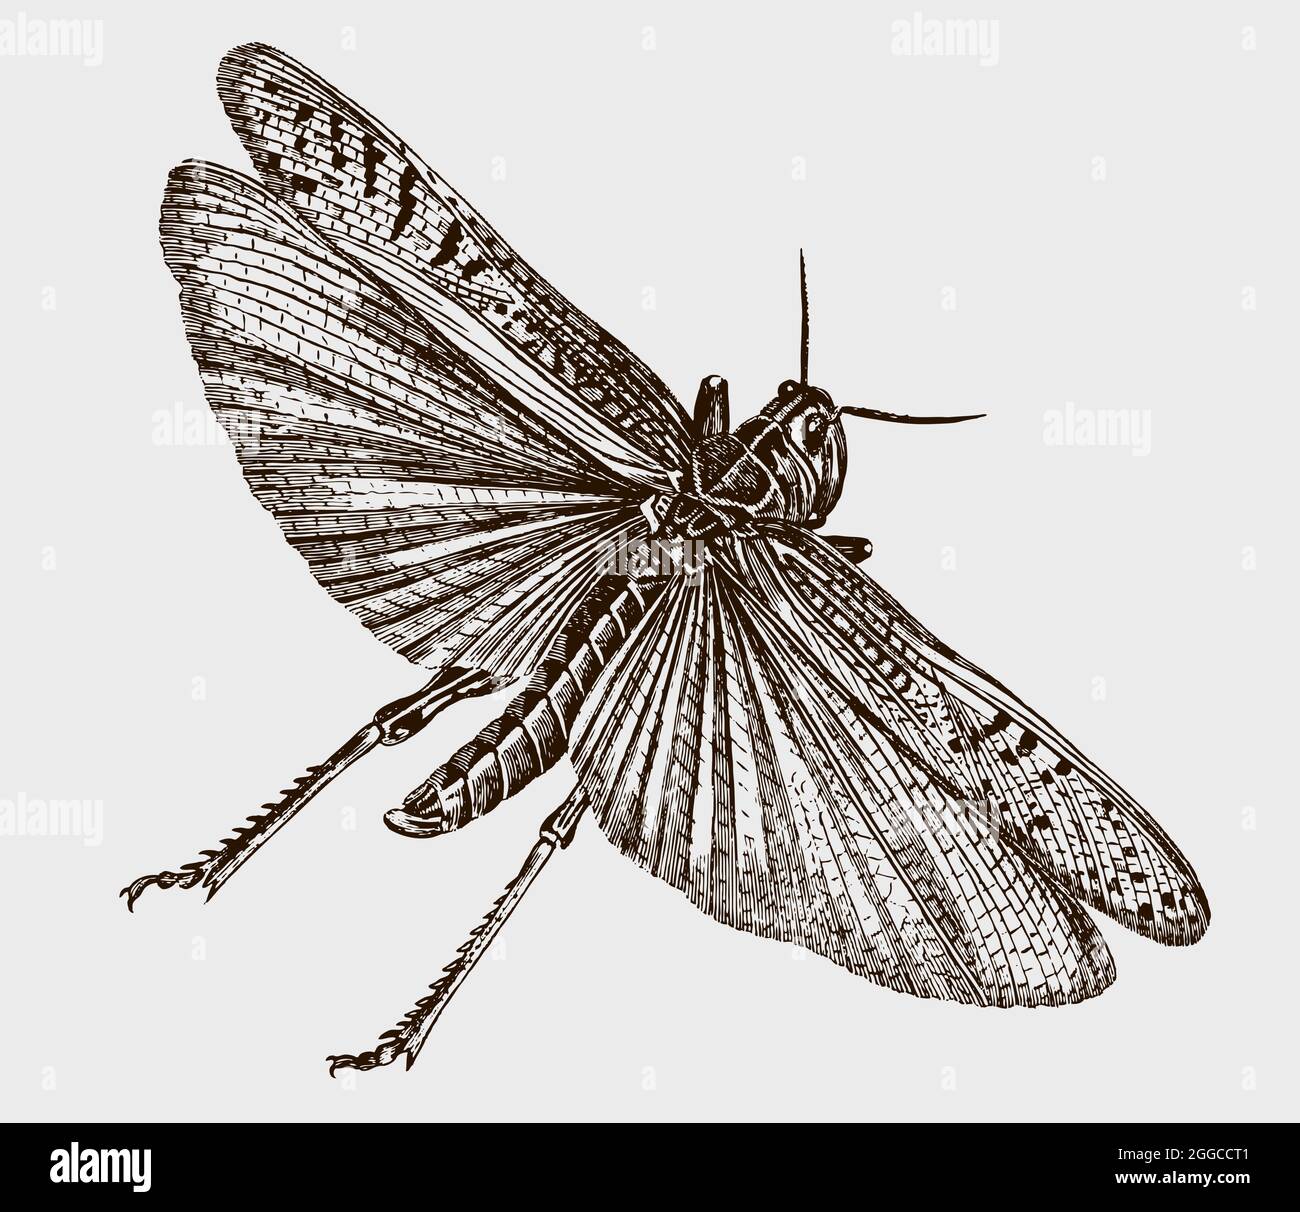 Flying migratory locust, locusta migratoria in top view. Illustration after antique engraving from the early 19th century Stock Vector